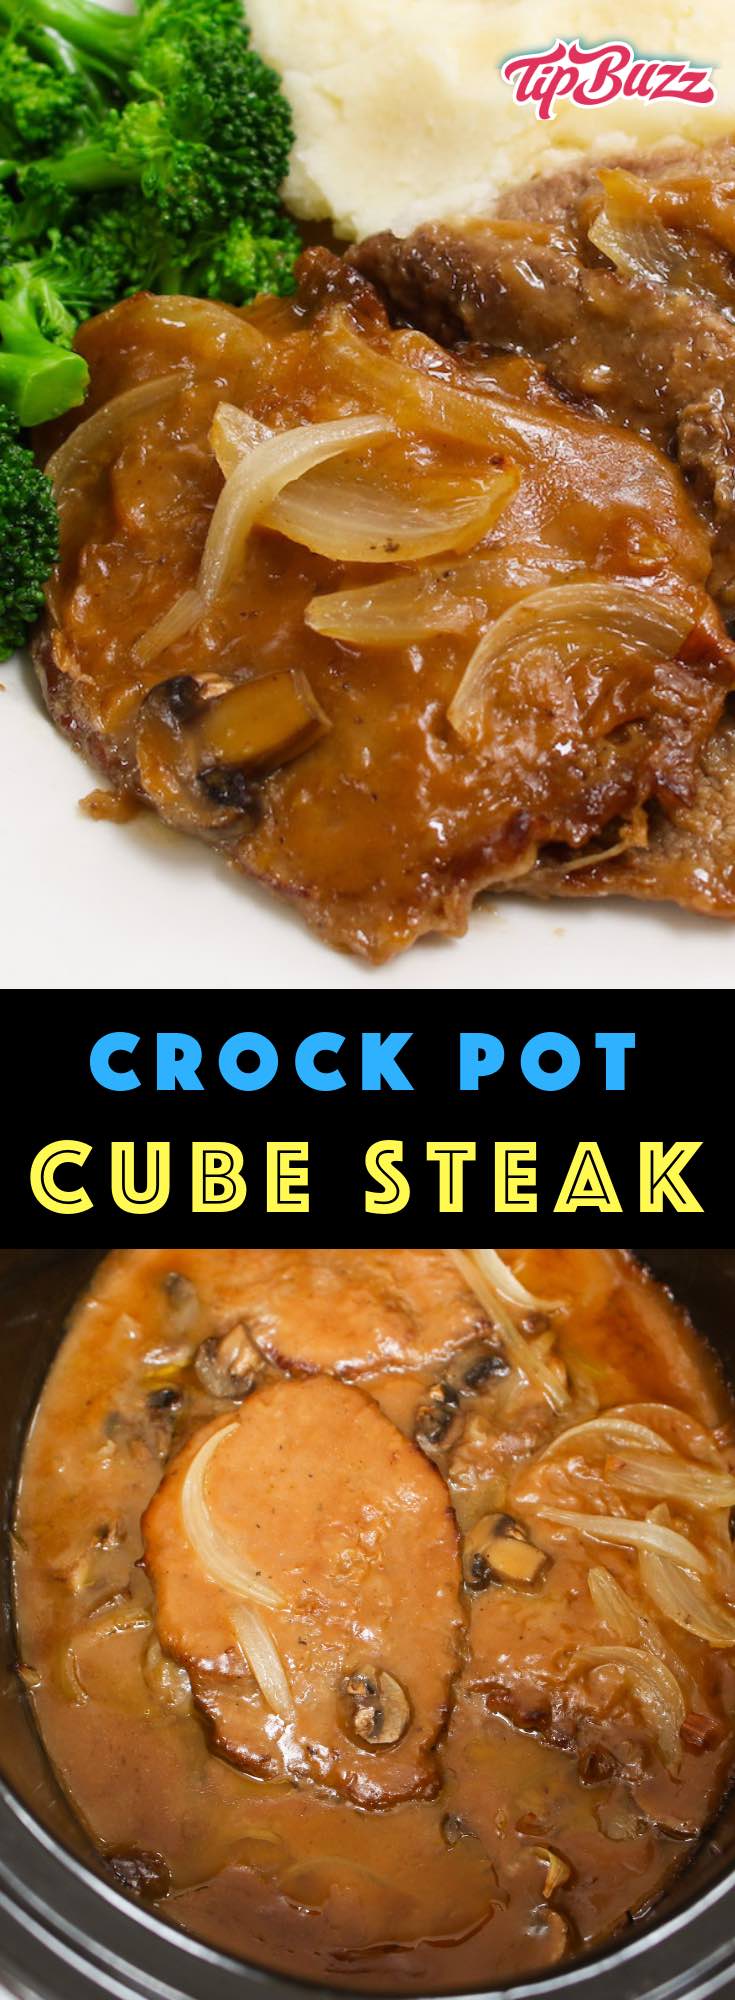 Crock Pot Cube Steak with Gravy is tender and succulent cubed steak smothered with a rich mushroom sauce. It’s easy to make in the slow cooker and serve with mashed potatoes and green vegetables on the side.